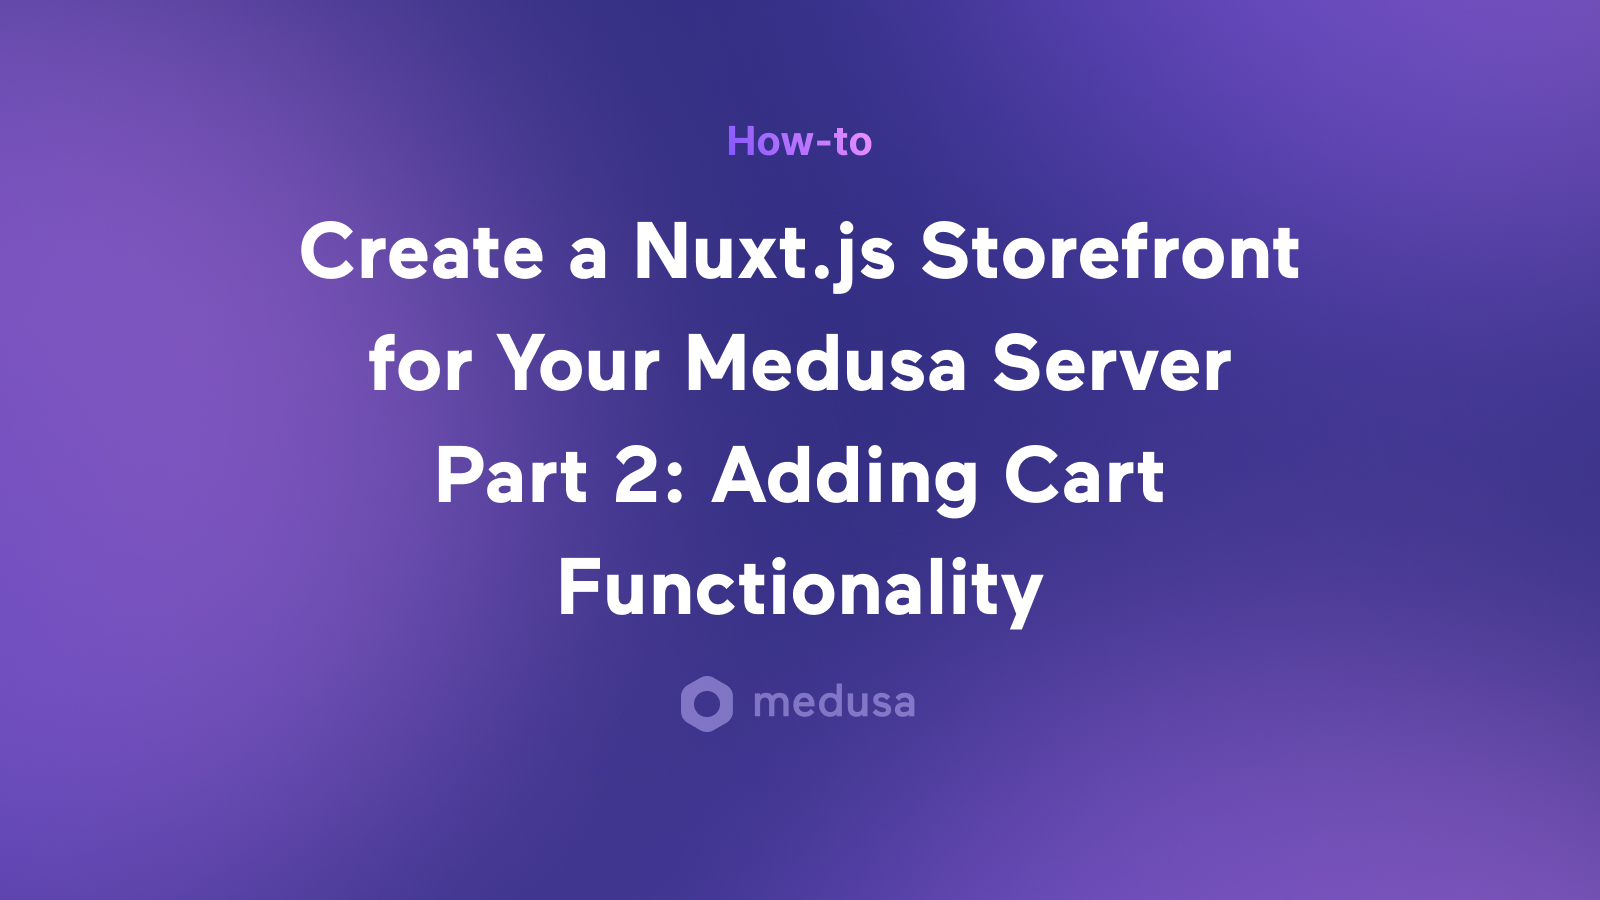 Building with Nuxt.js for a Vue Ecommerce Platform Part 2: Adding Cart Functionality